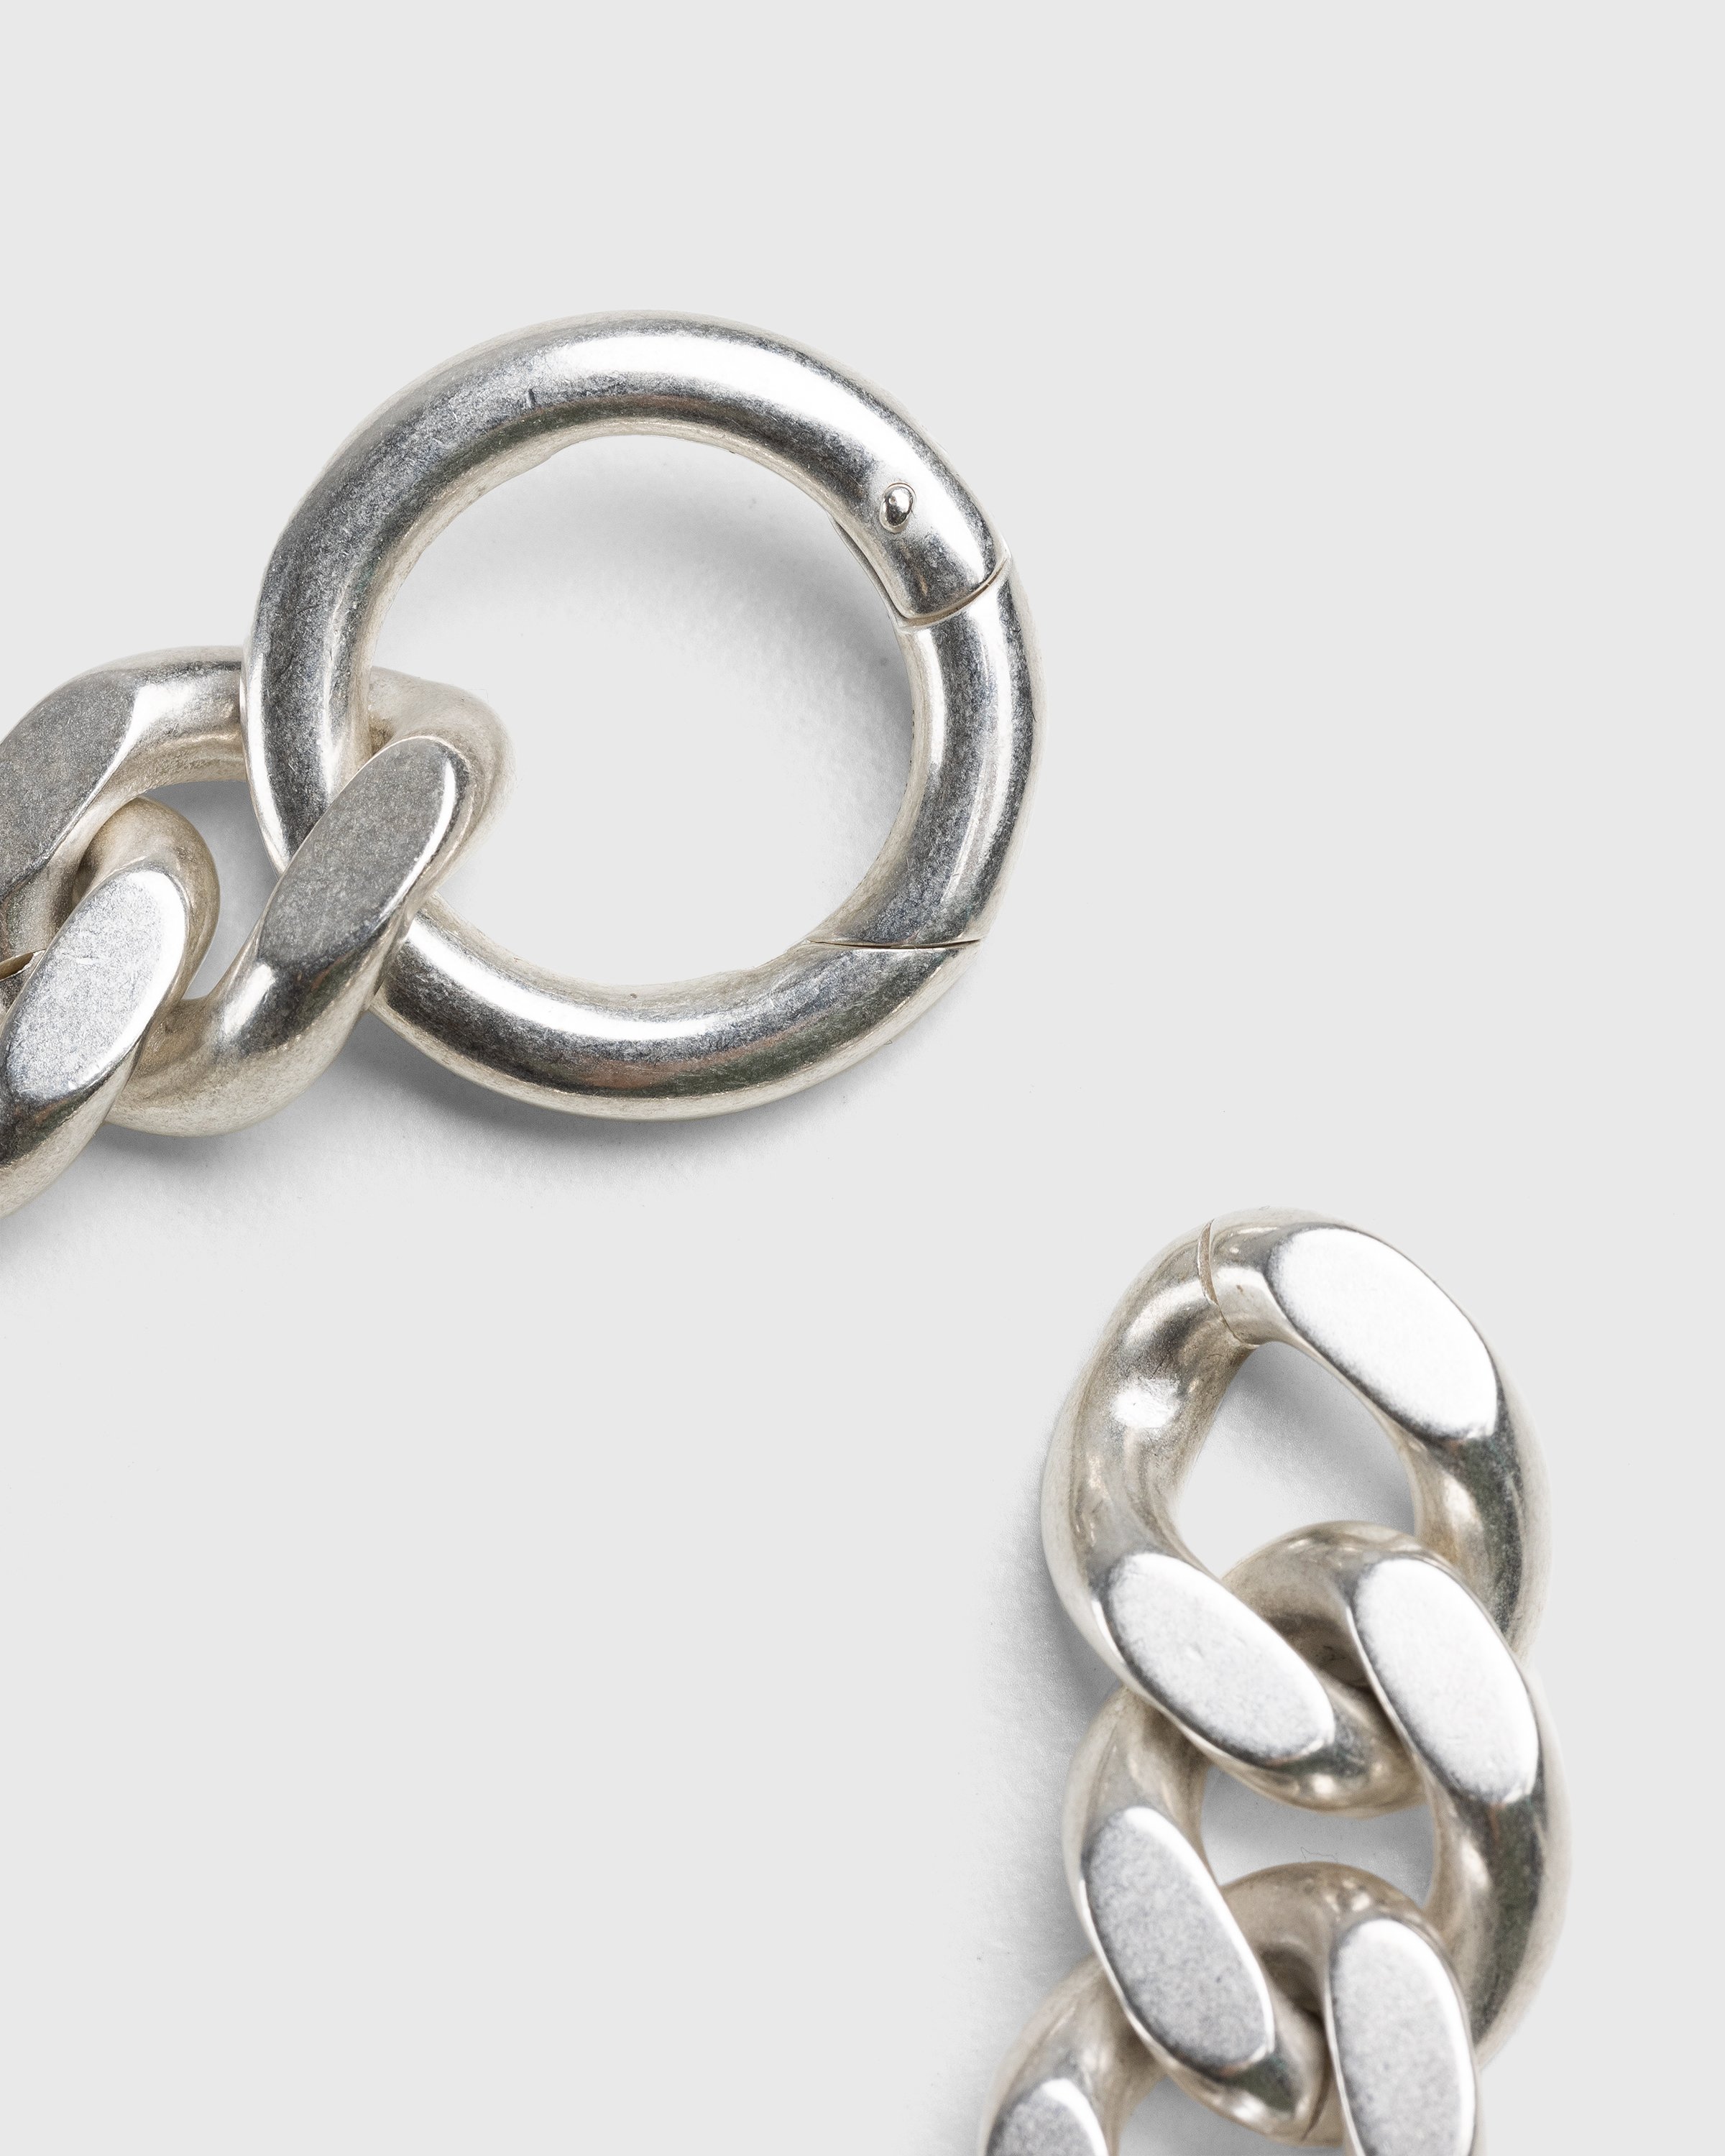 Jil Sander - Chain Link Key Ring Silver - Accessories - Silver - Image 3